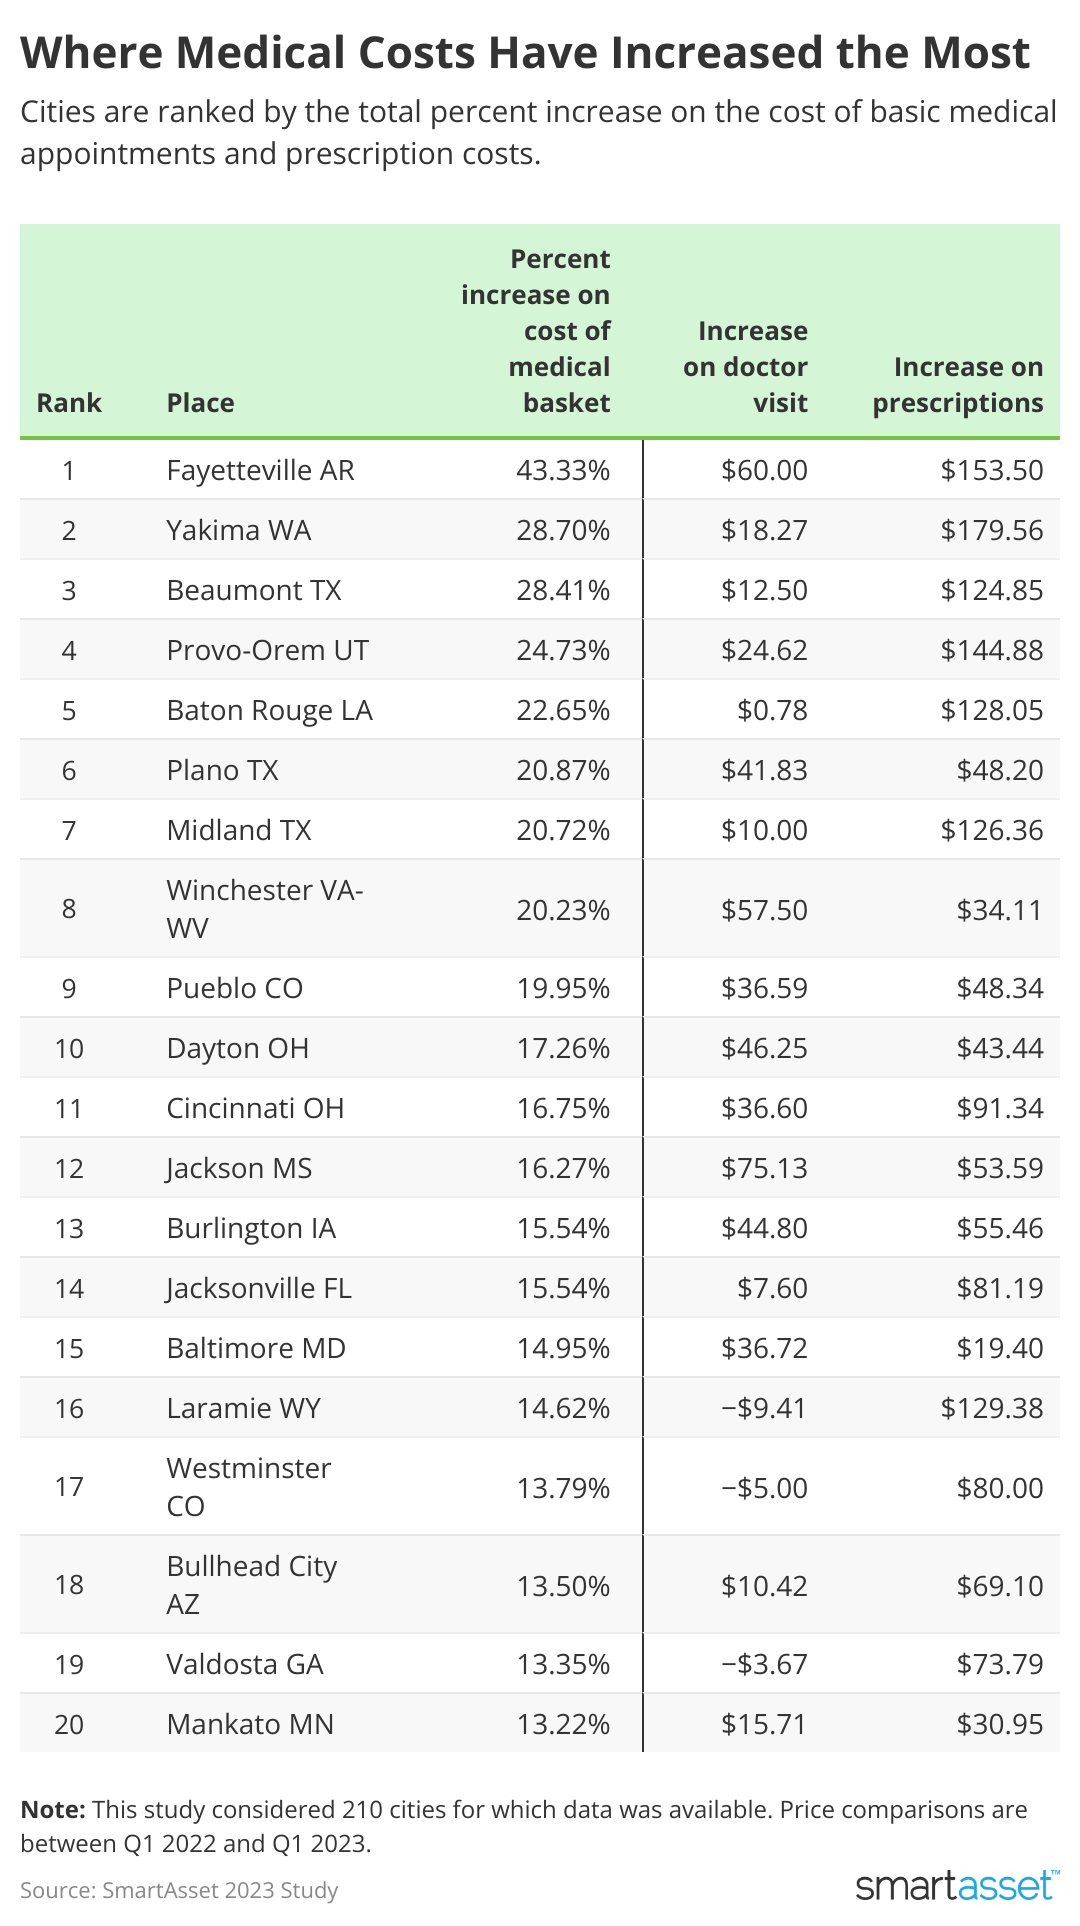 Table showing that a list of 10 U.S. cities with the biggest increase in medical costs.